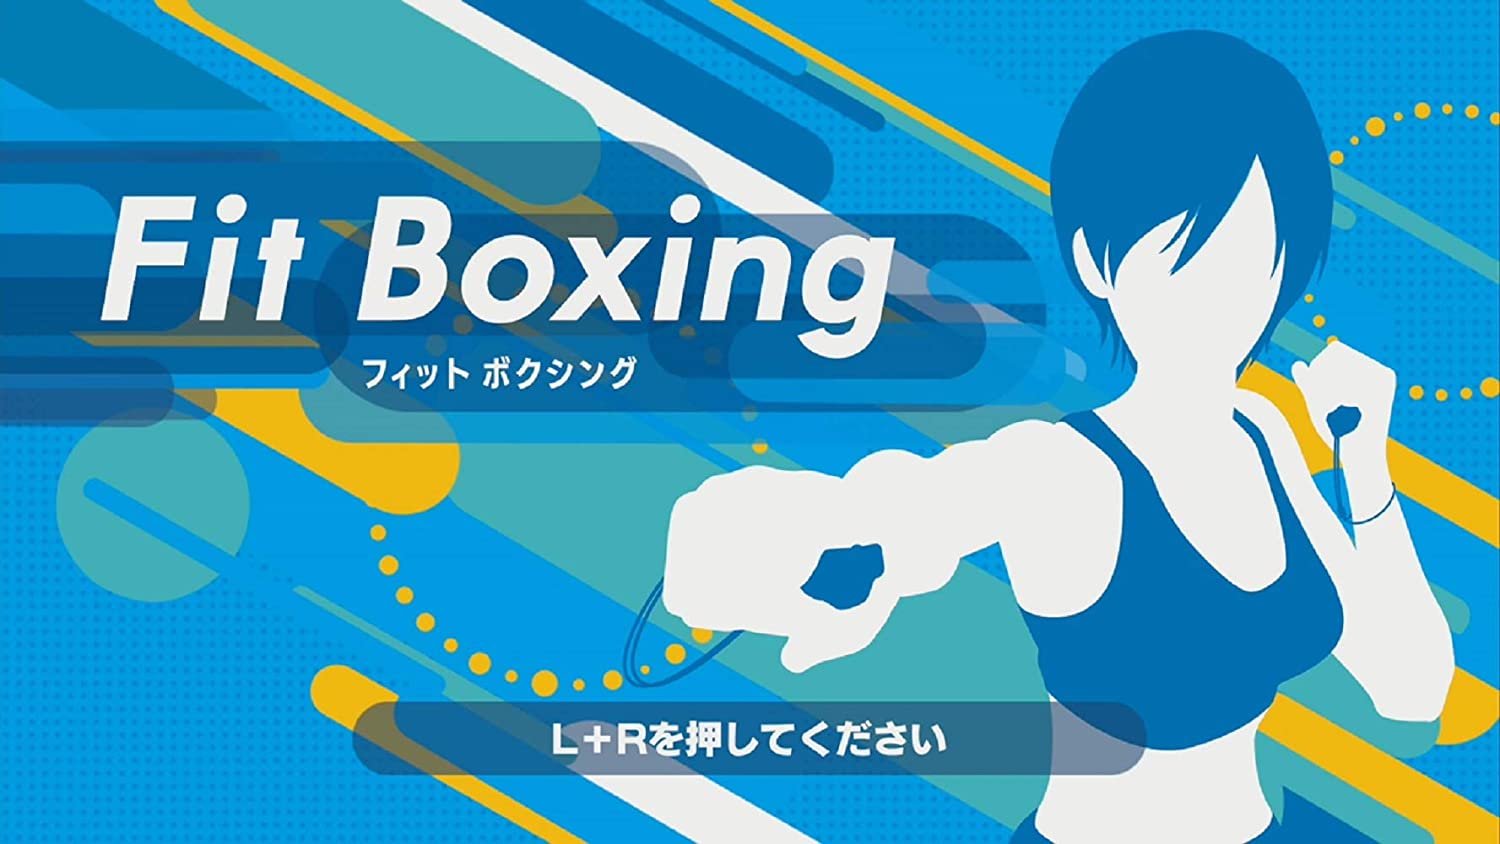 Fit boxing